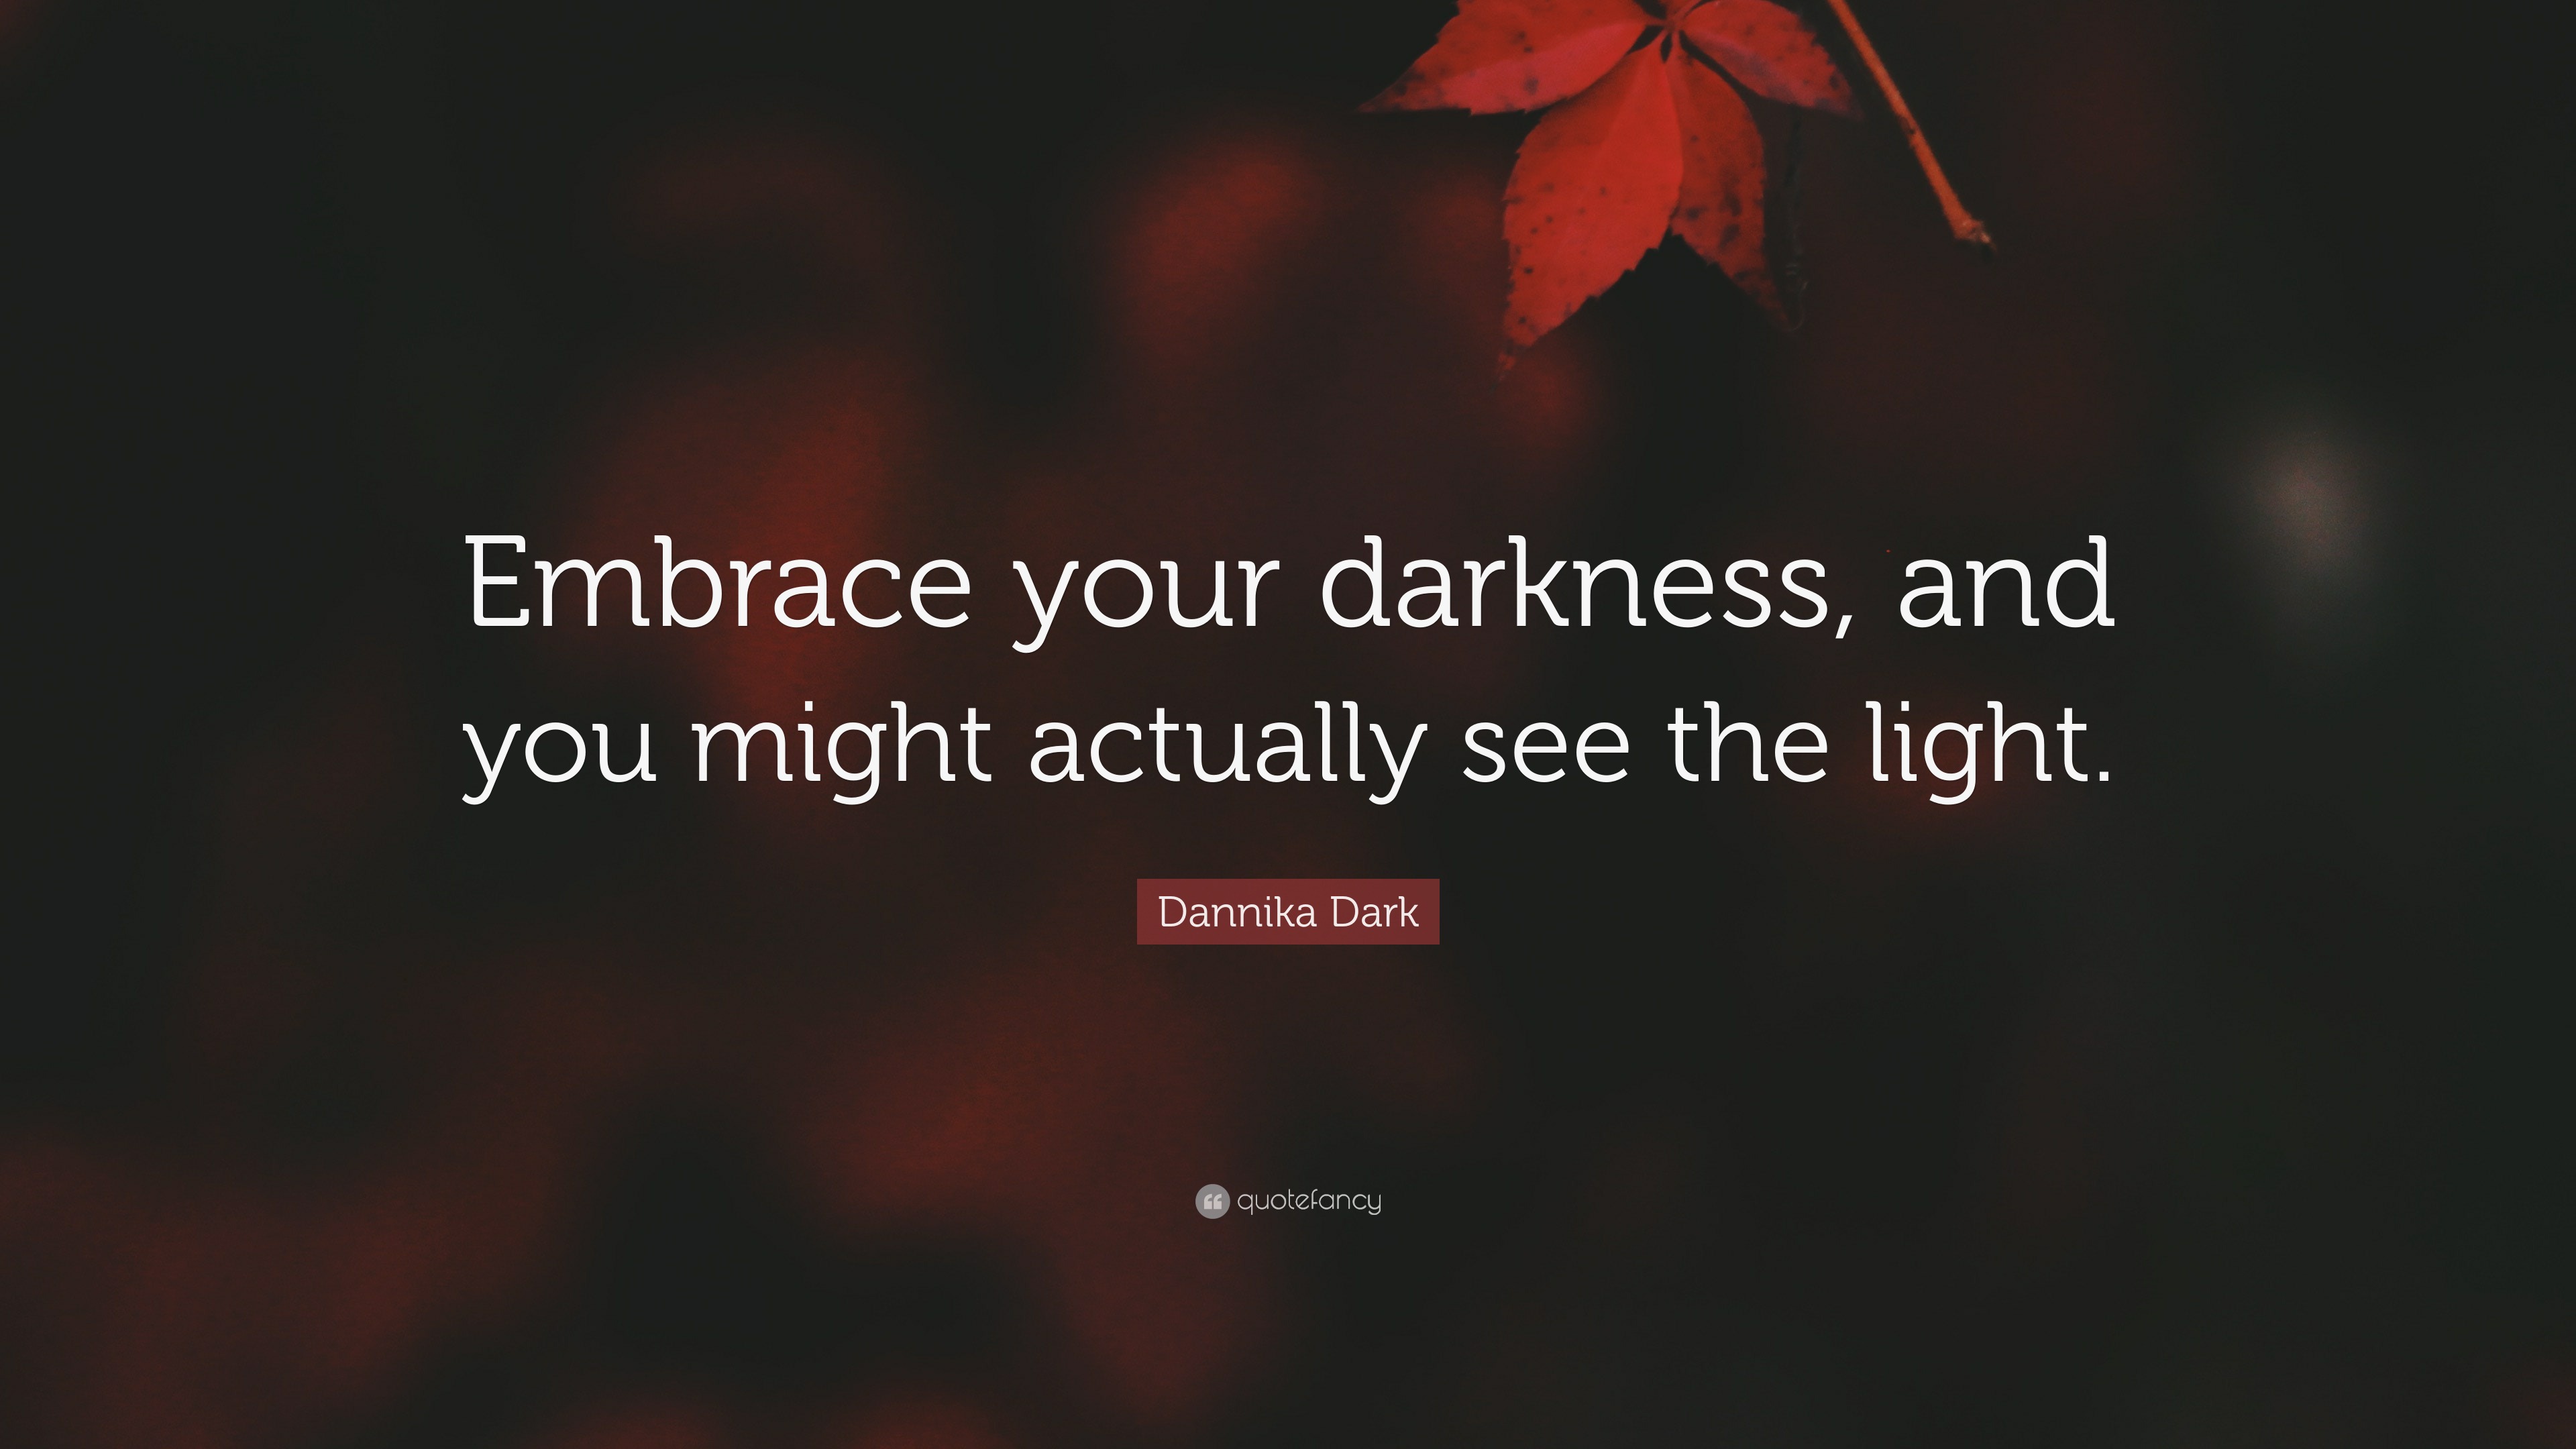 Dannika Dark Quote “embrace Your Darkness And You Might Actually See The Light” 